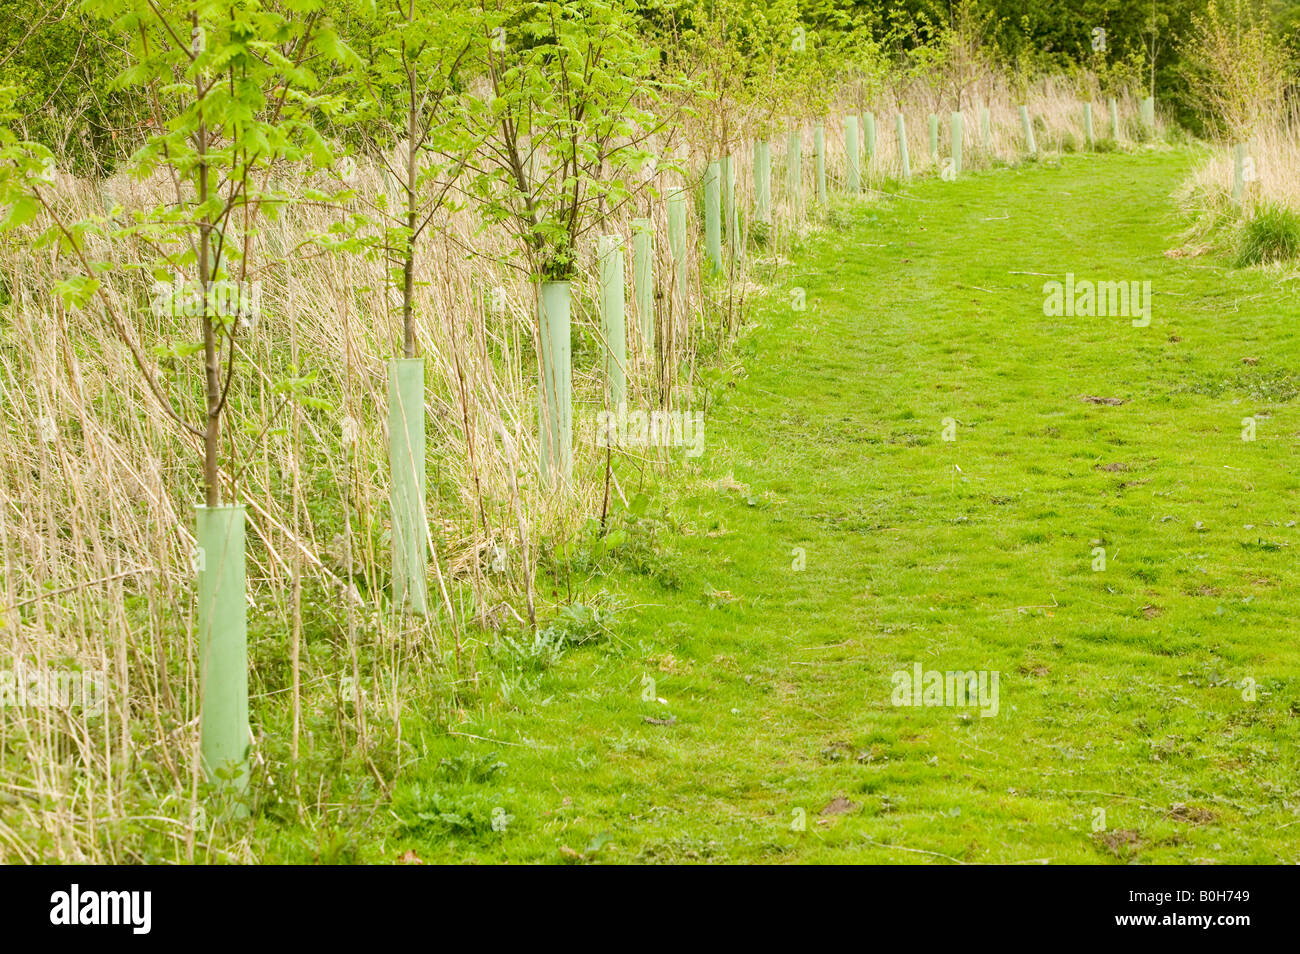 Andrews wood in Ashton Hayes planted to offset carbon emmissions Stock Photo